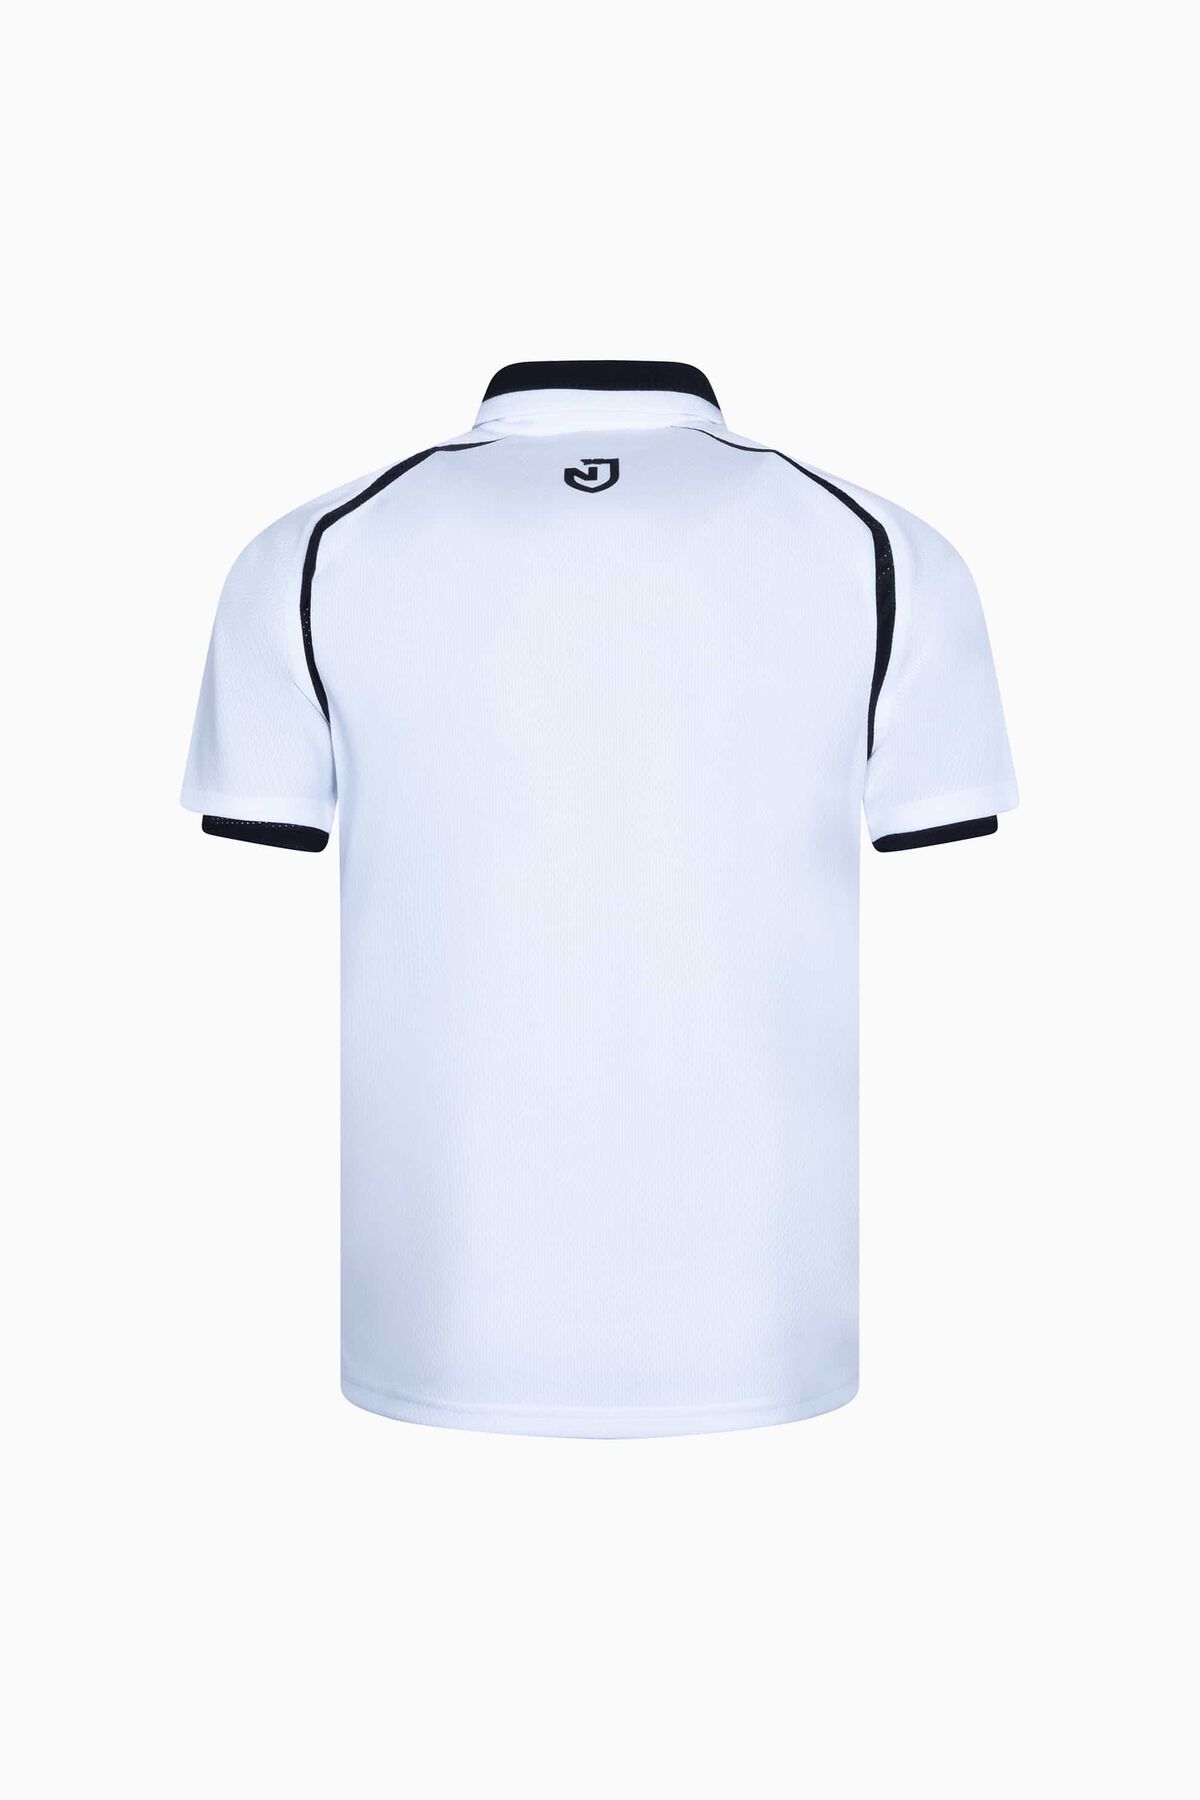 PXG x NJ Comfort Fit Short Sleeve Layered Polo 